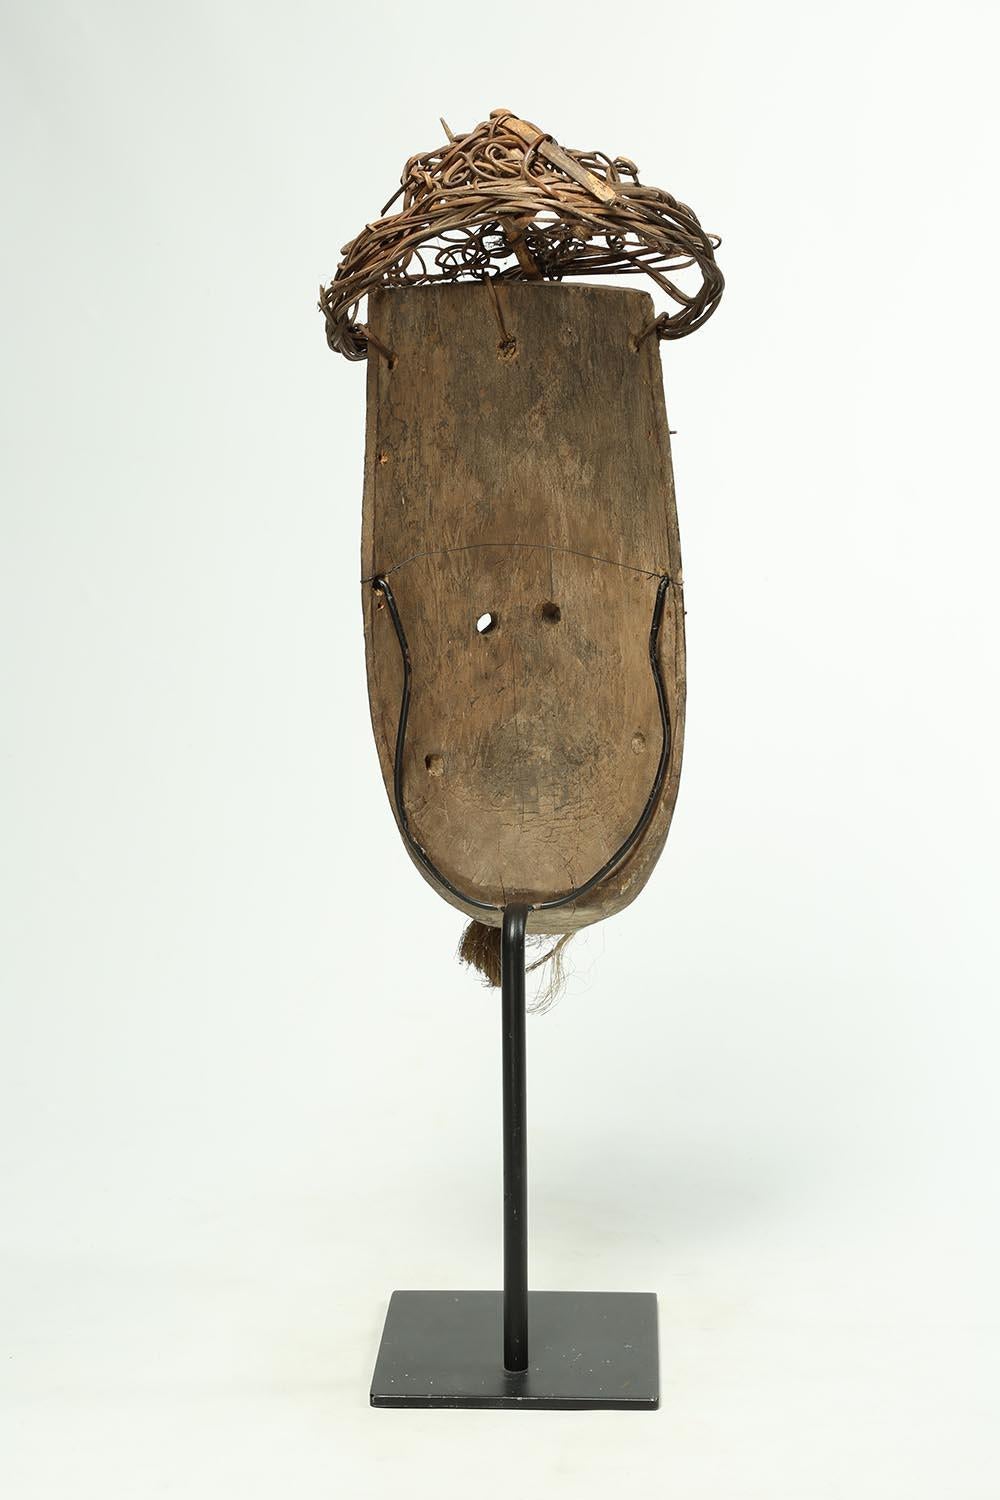 Tribal Wood and Pigment Dayak Hudoq Mask on Stand, Early 20th Century Borneo 1